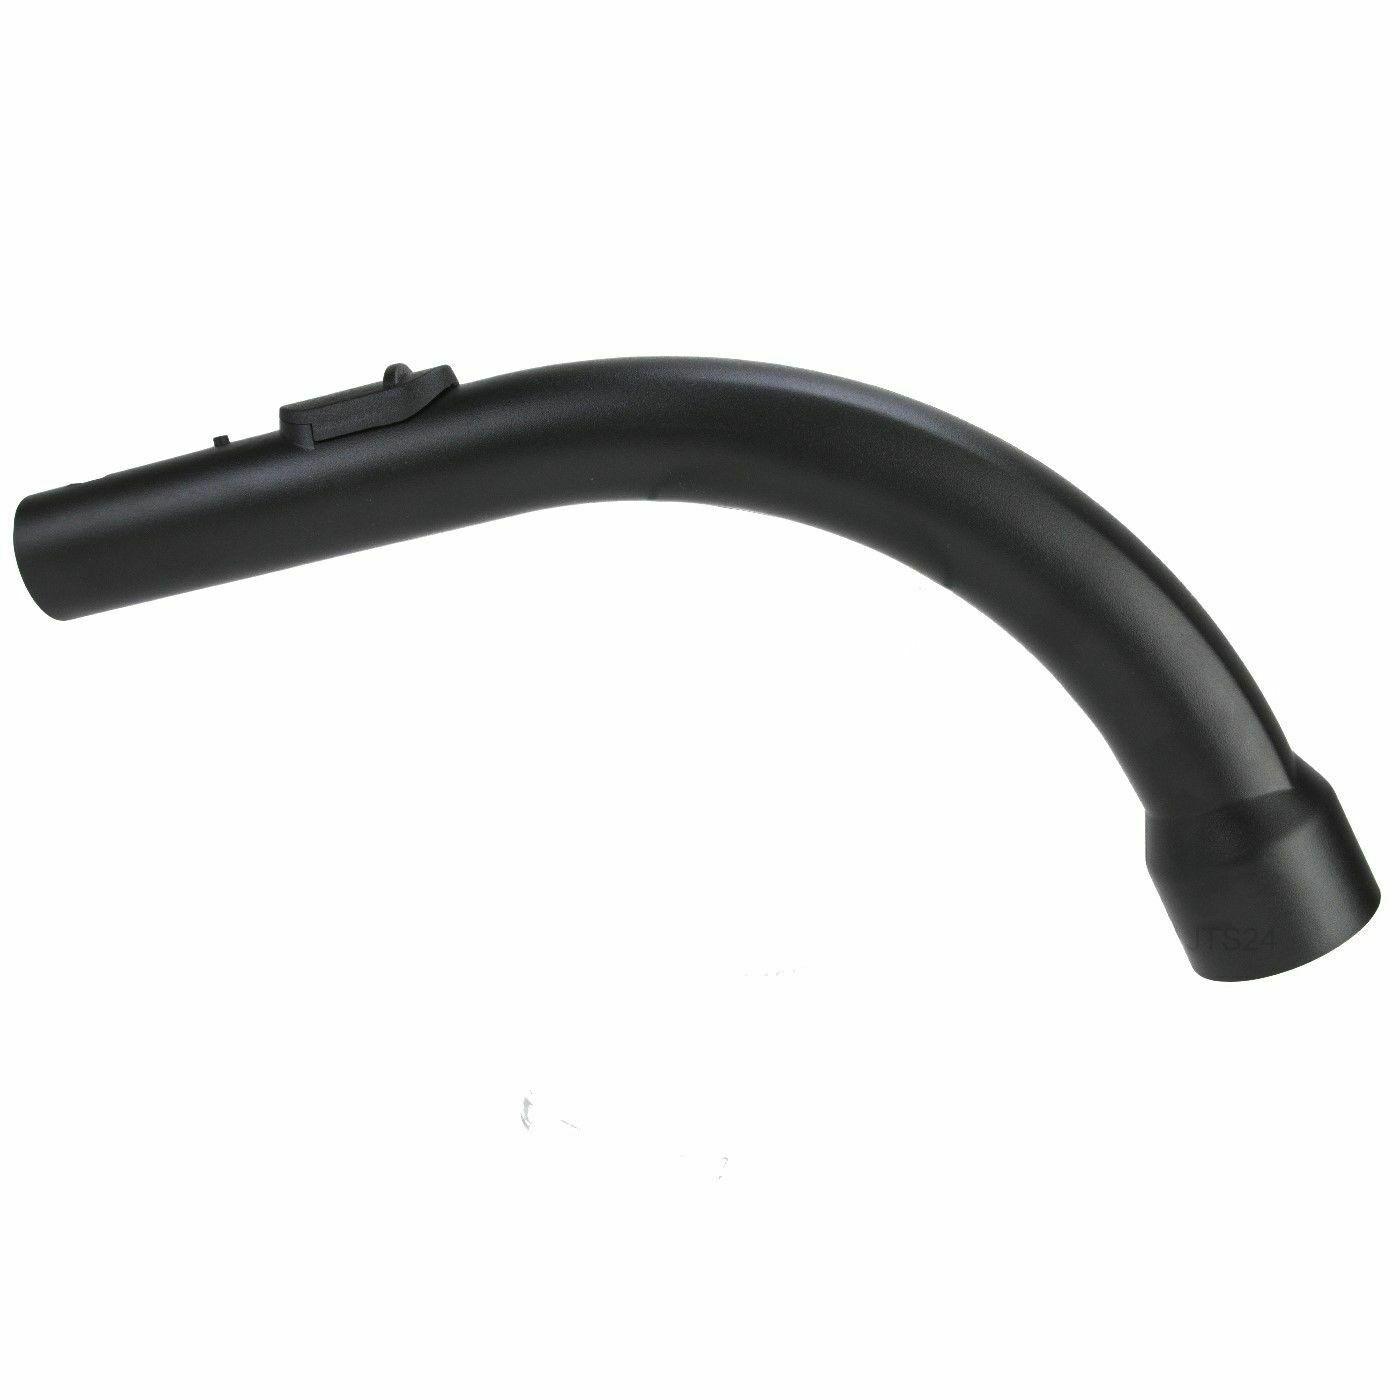 Hose Bent End Curved Handle For Miele S6320 S6330 S6340 S6350 S6360 S844 Sparesbarn